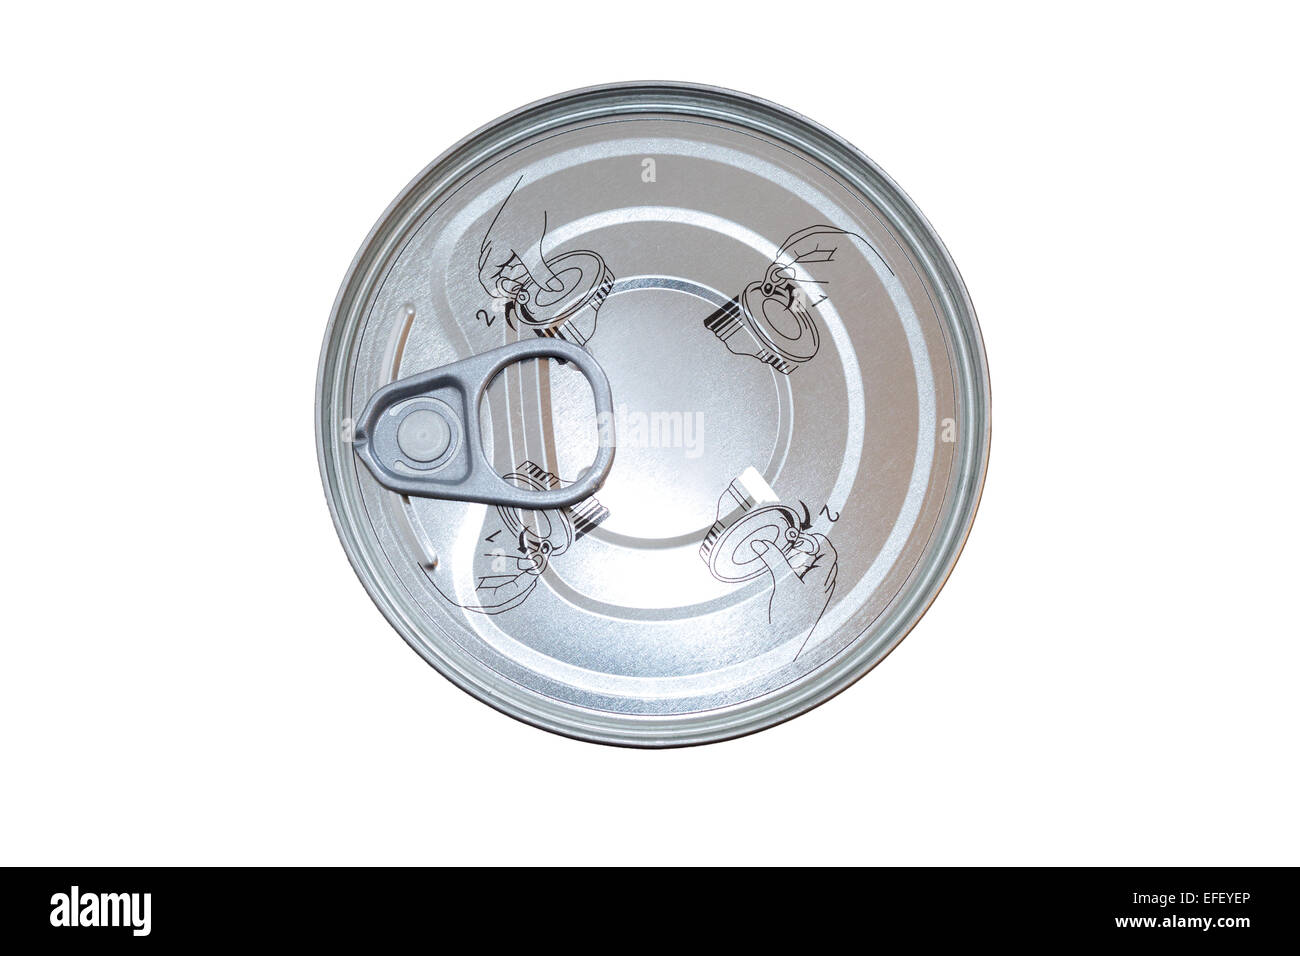 Aluminum food can with an easy-open, full pull-out end, viewed from above, isolated on white background. Stock Photo